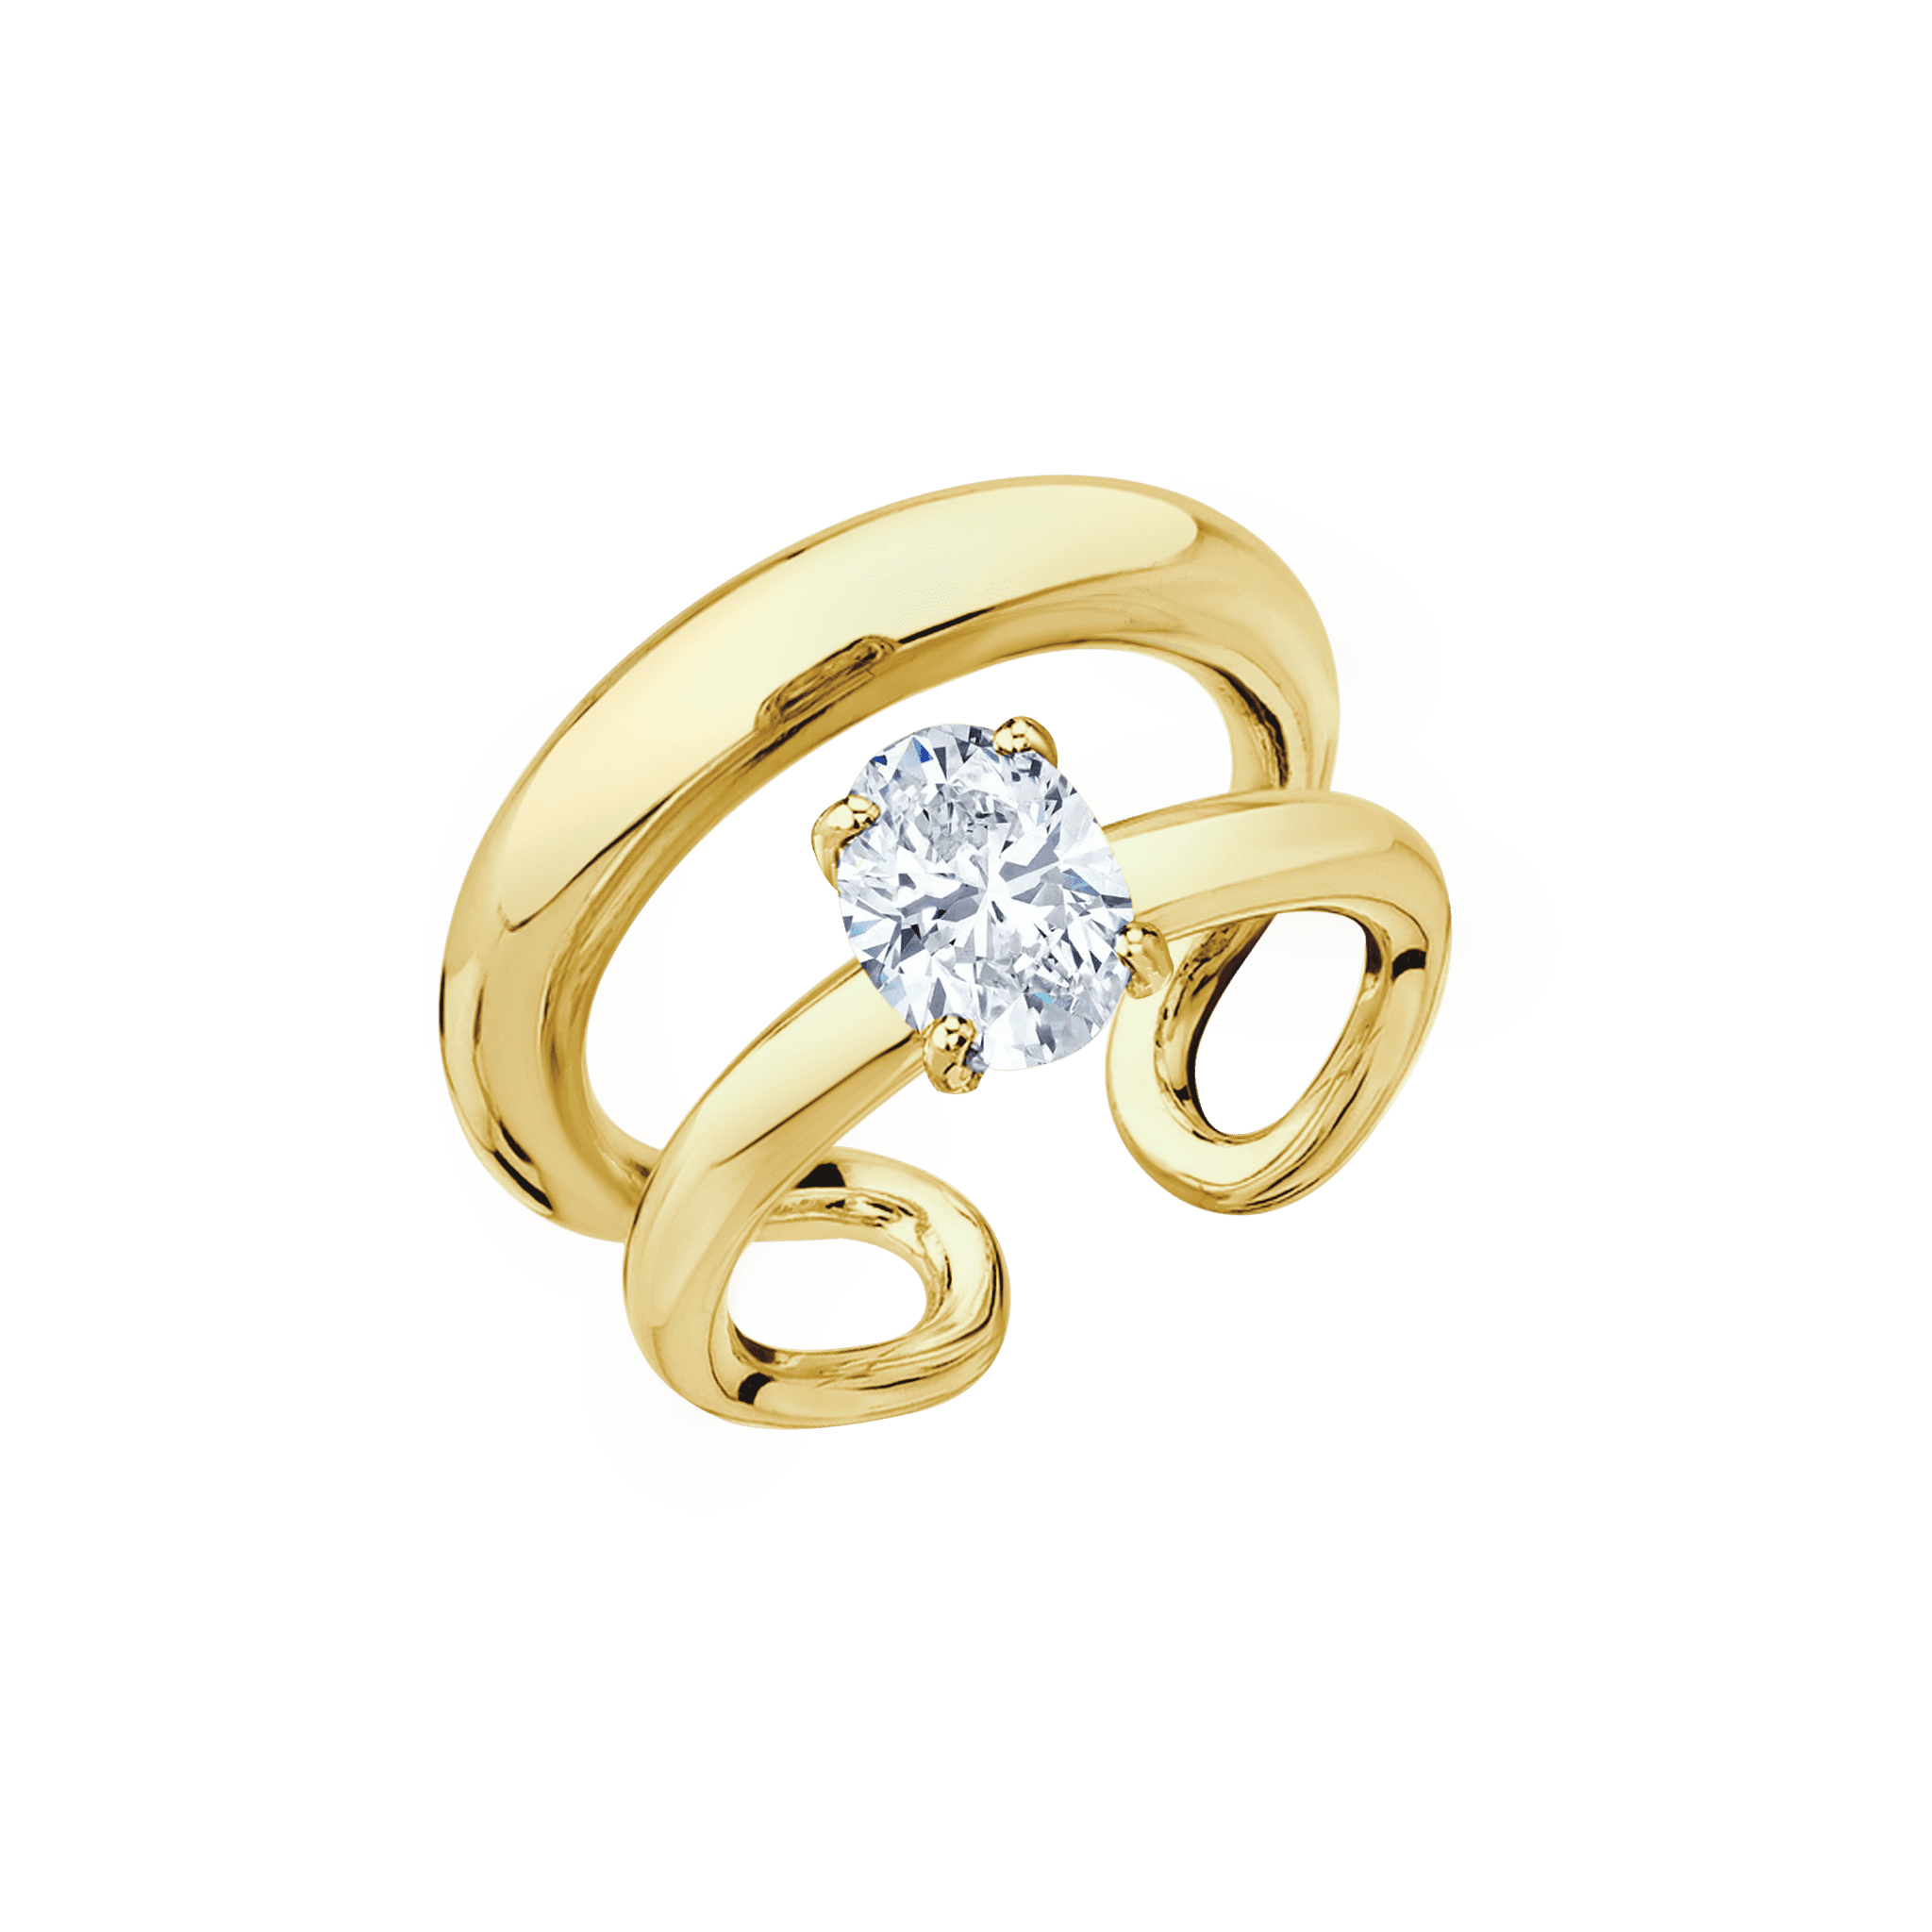 Twin Tusk Ring with Suspended Oval Diamond - Gabriela Artigas